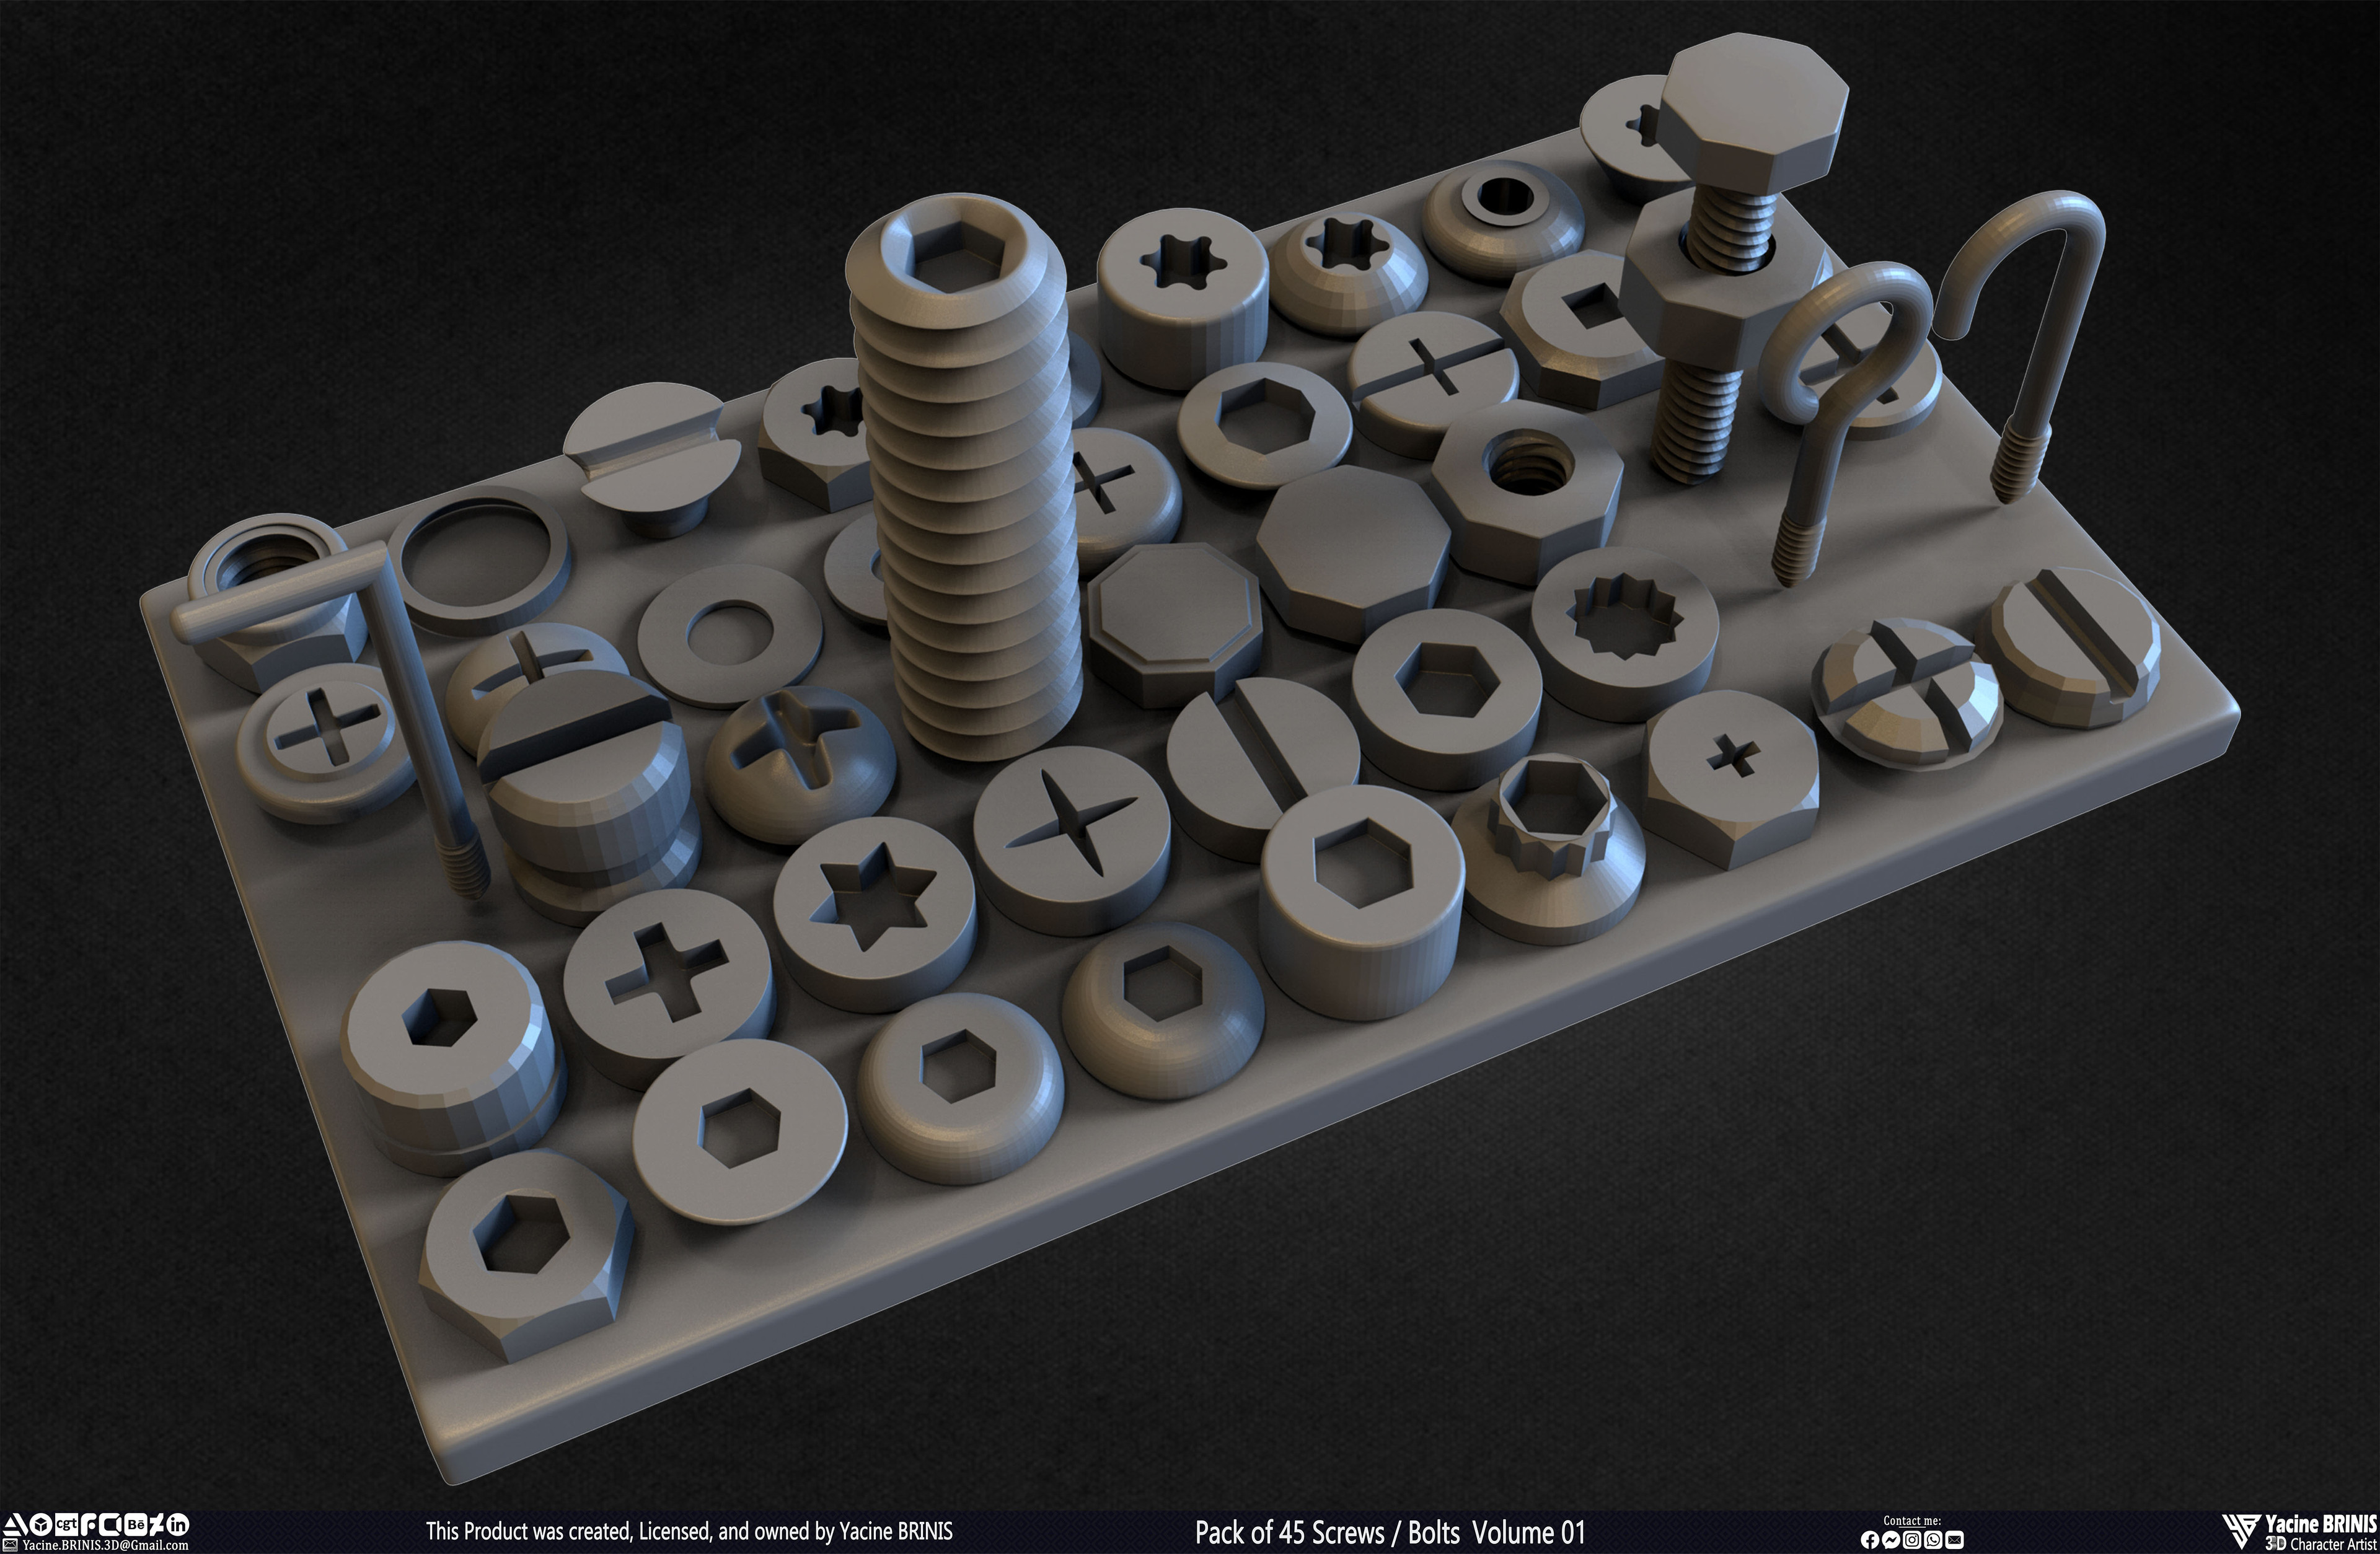 Pack of 45 Screws-Bolts Volume 01 Sculpted By Yacine BRINIS Set 011